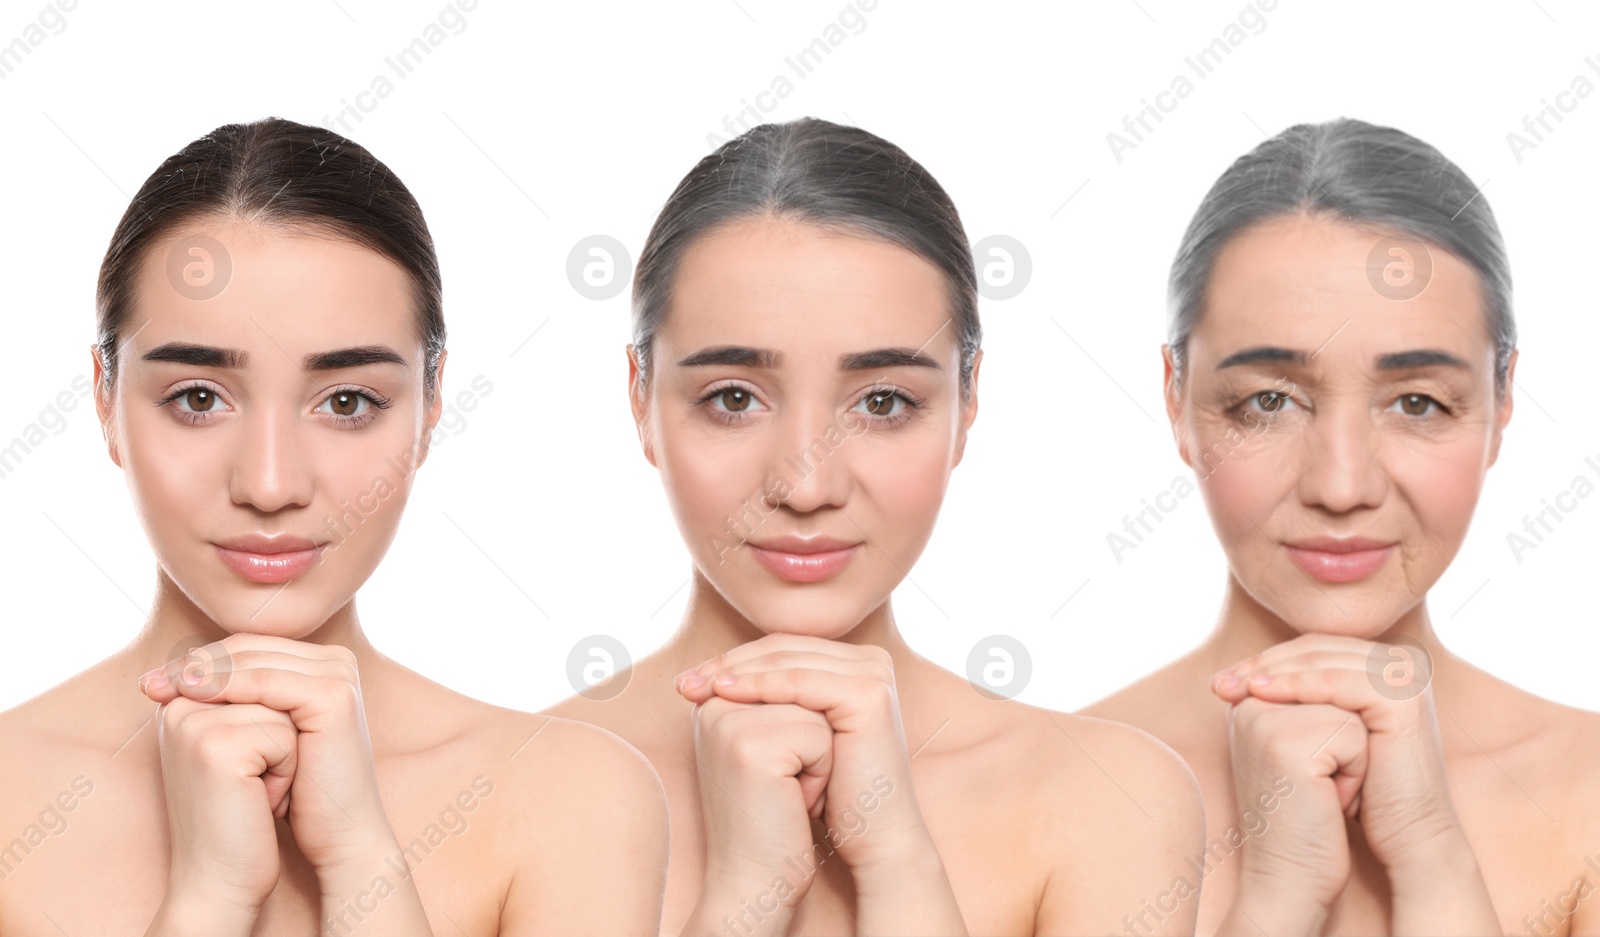 Image of Natural aging, comparison. Portraits of woman in different ages on white background